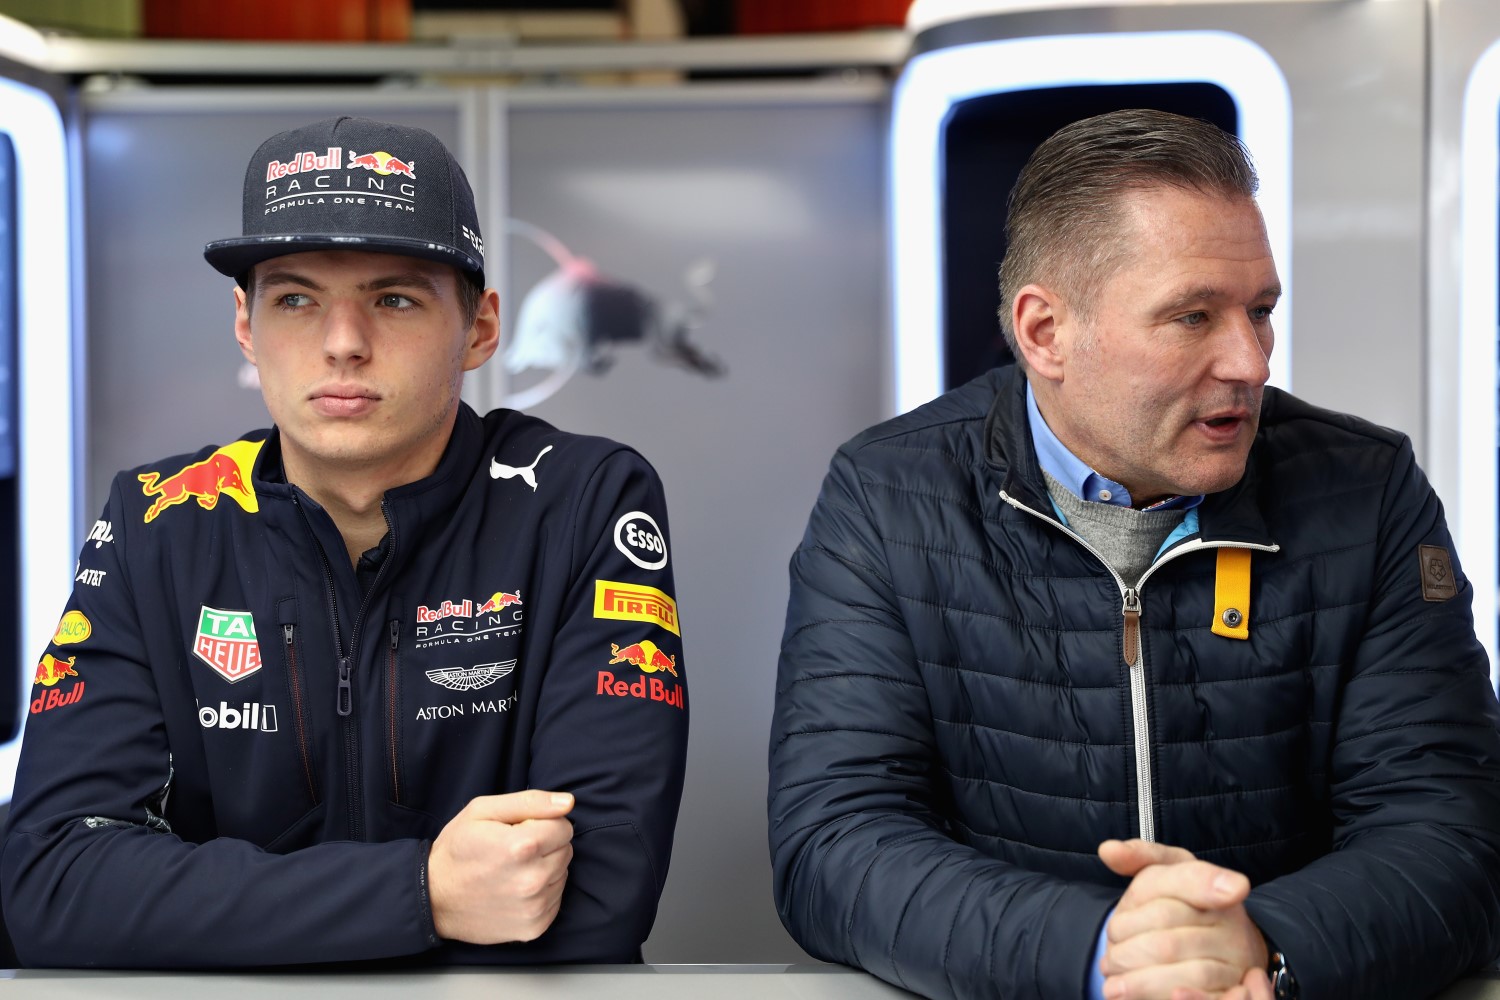 Jos (R) had better worry about his own son's career if his teammate Ricciardo keeps beating him